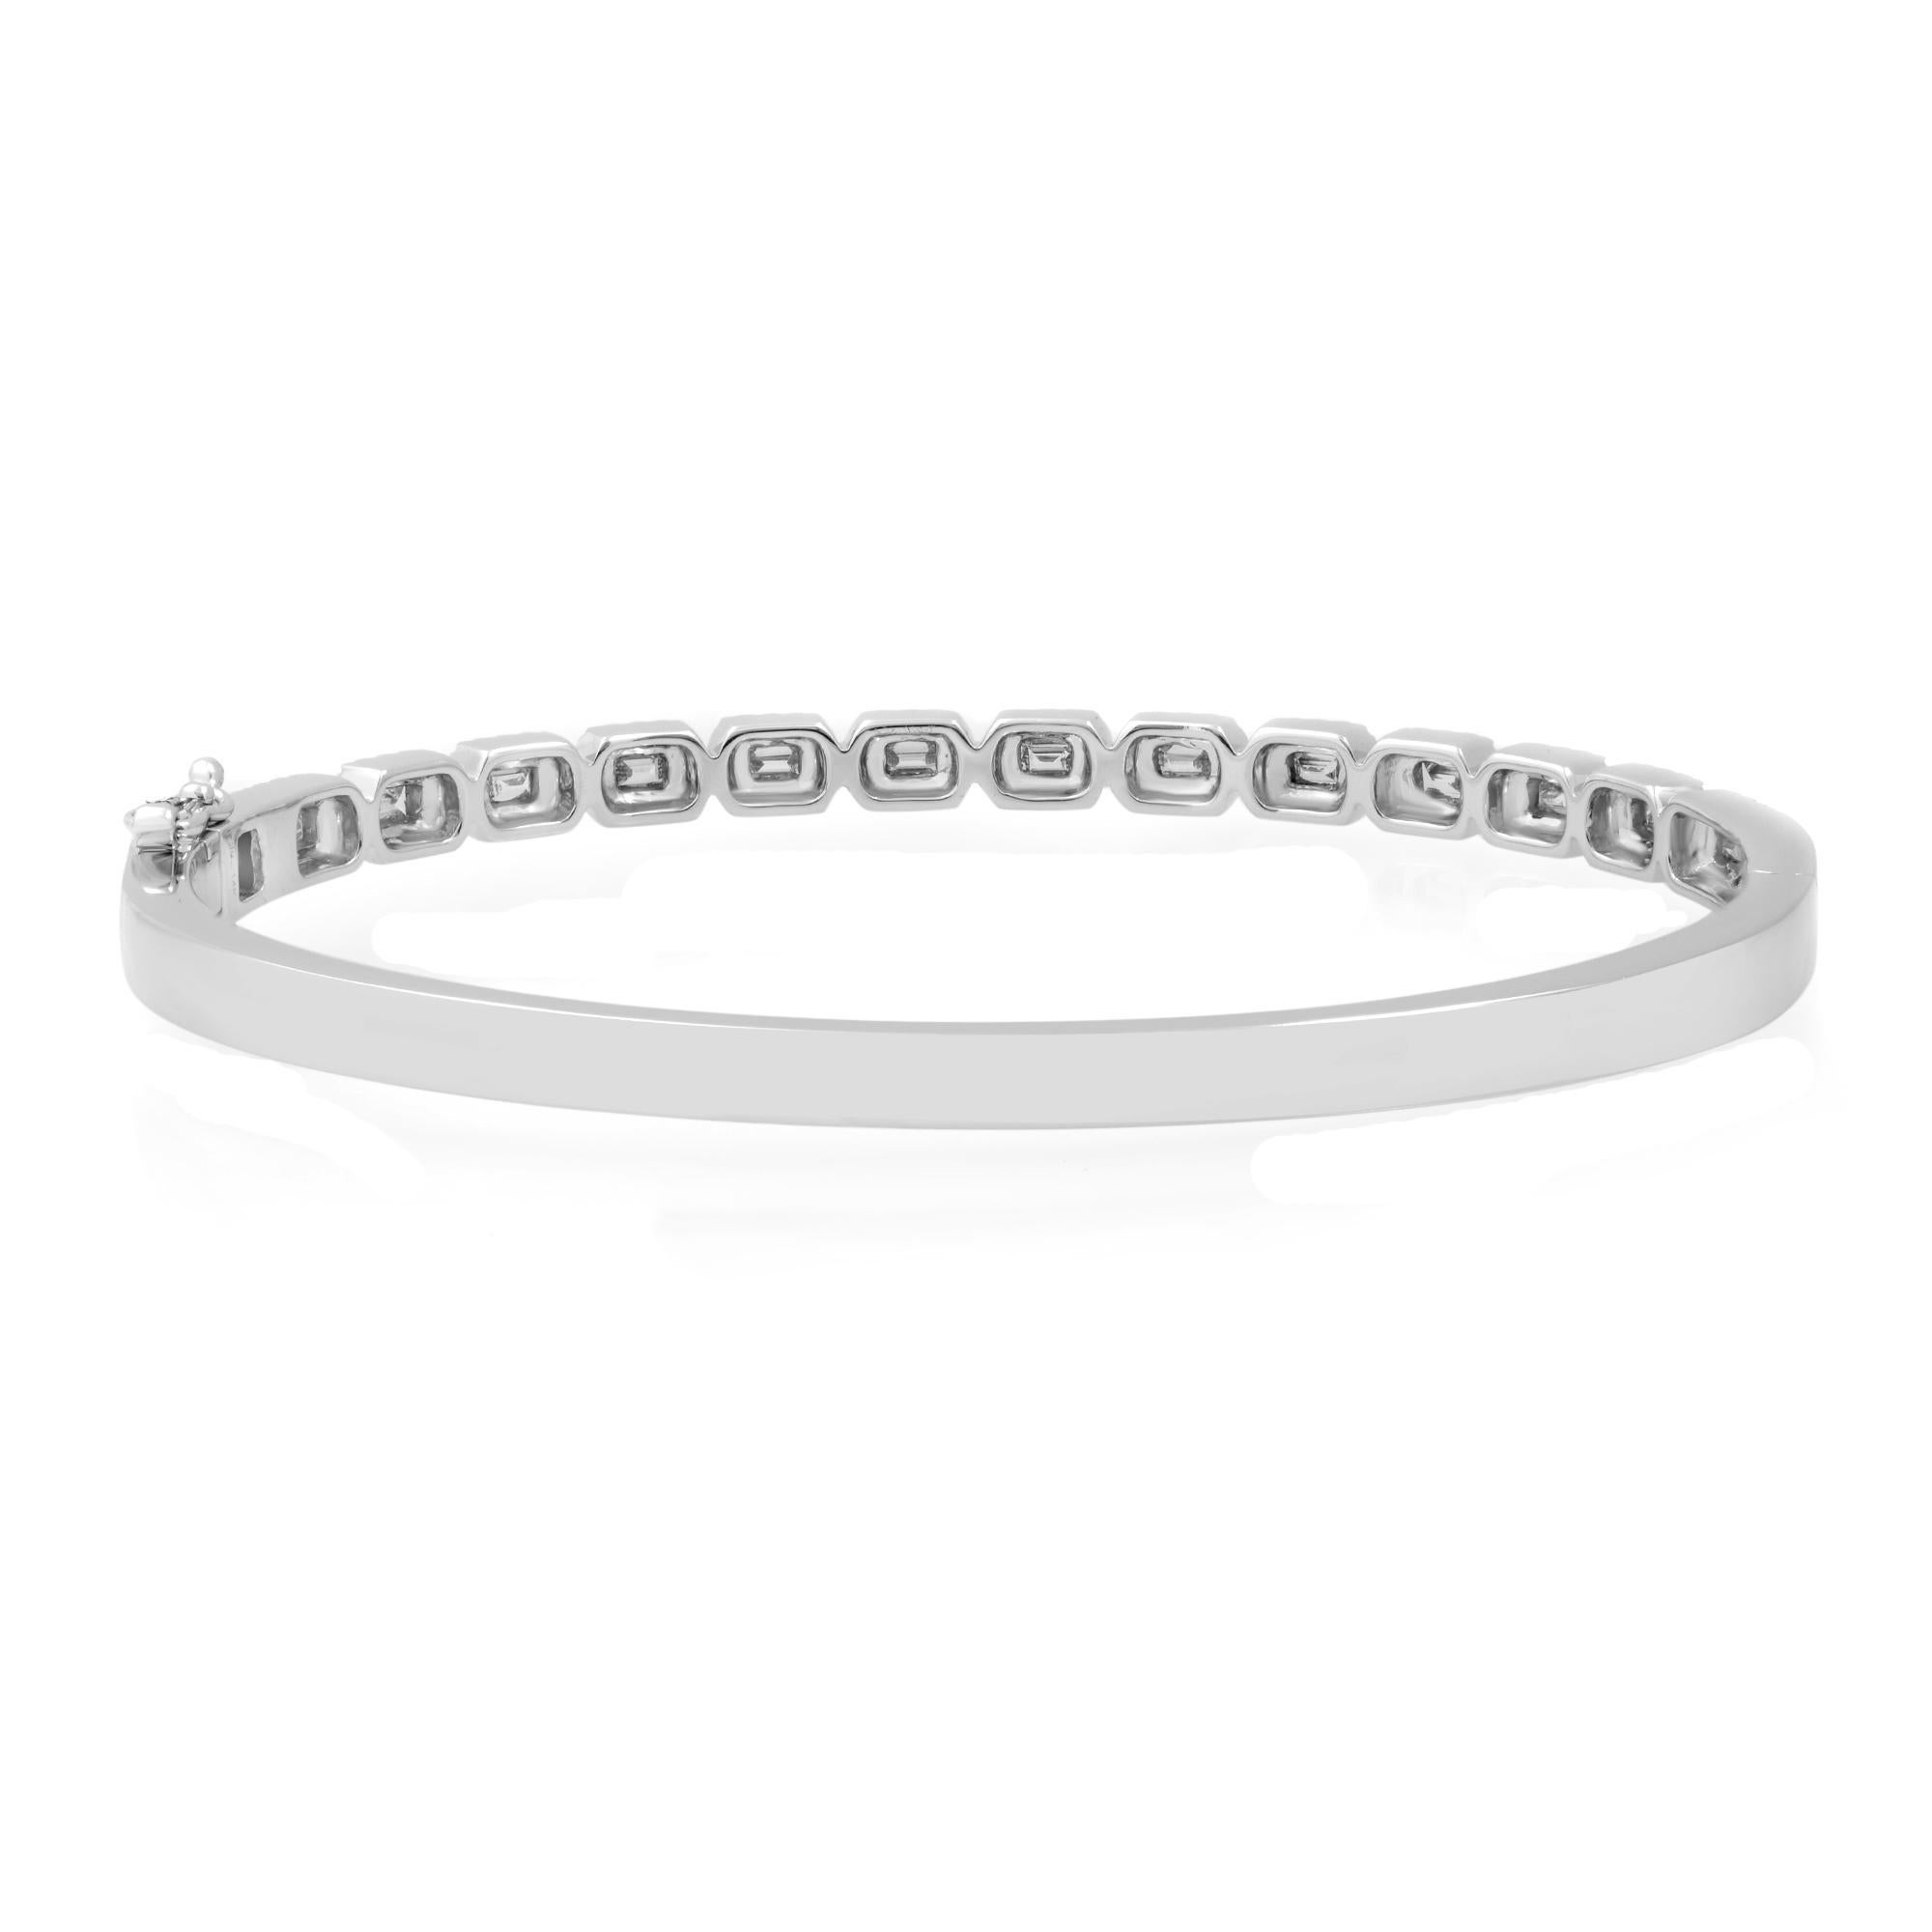 Let your style shine with this classic and elegant diamond bangle bracelet. Encrusted with bright white natural baguette cut and round cut diamonds set halfway through the bangle. Crafted in fine high polished 14k white gold. The total diamond